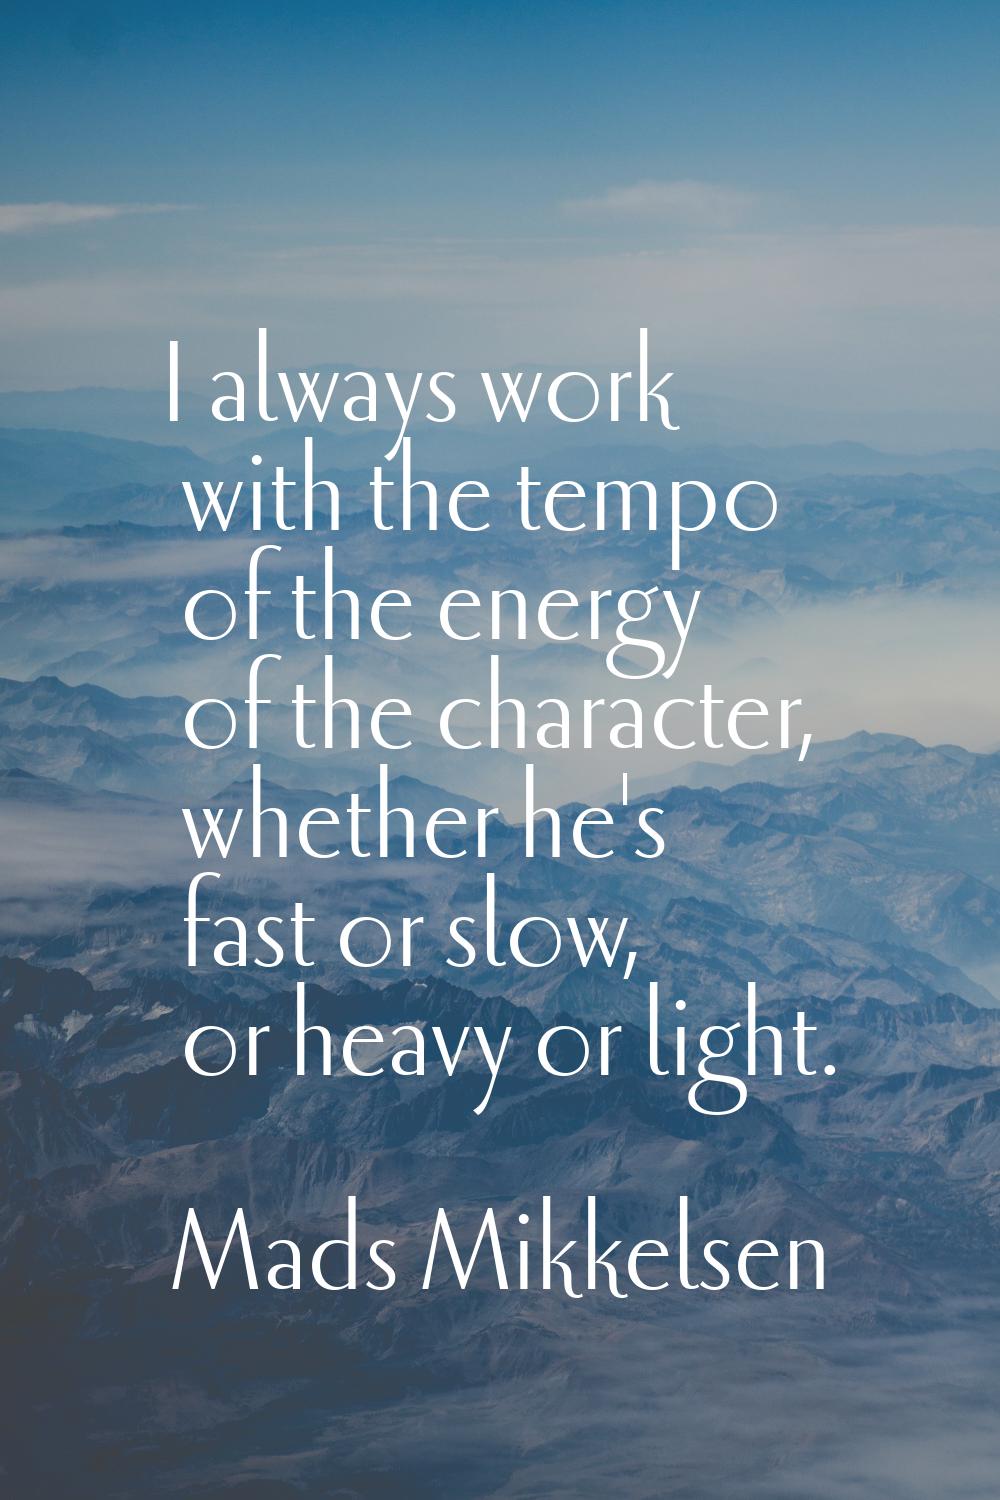 I always work with the tempo of the energy of the character, whether he's fast or slow, or heavy or